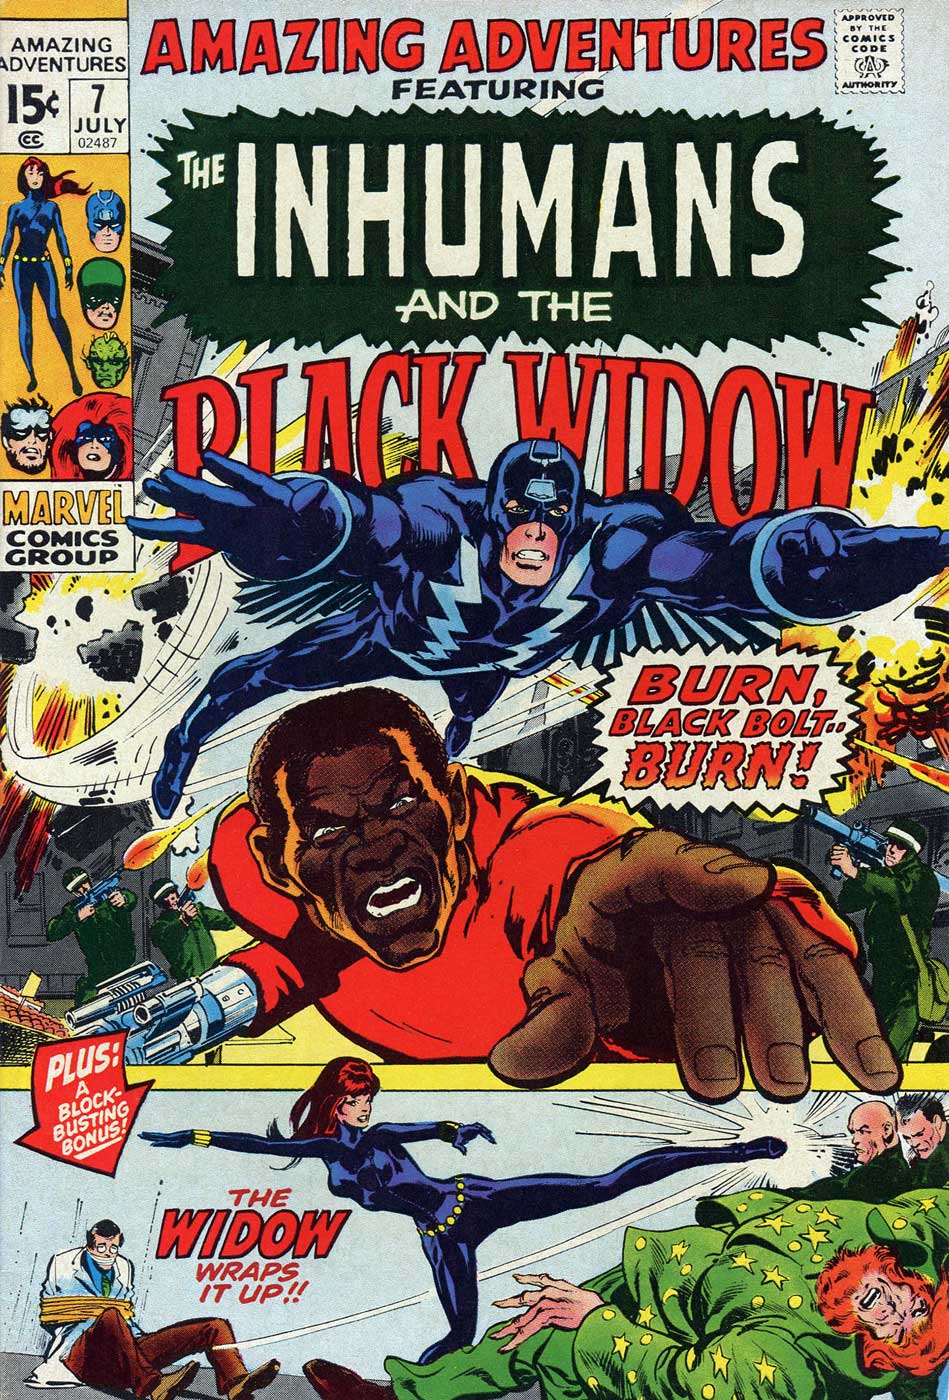 AMAZING ADVENTURES #7 featuring The Inhumans and Black Widow, cover by Neal Adams